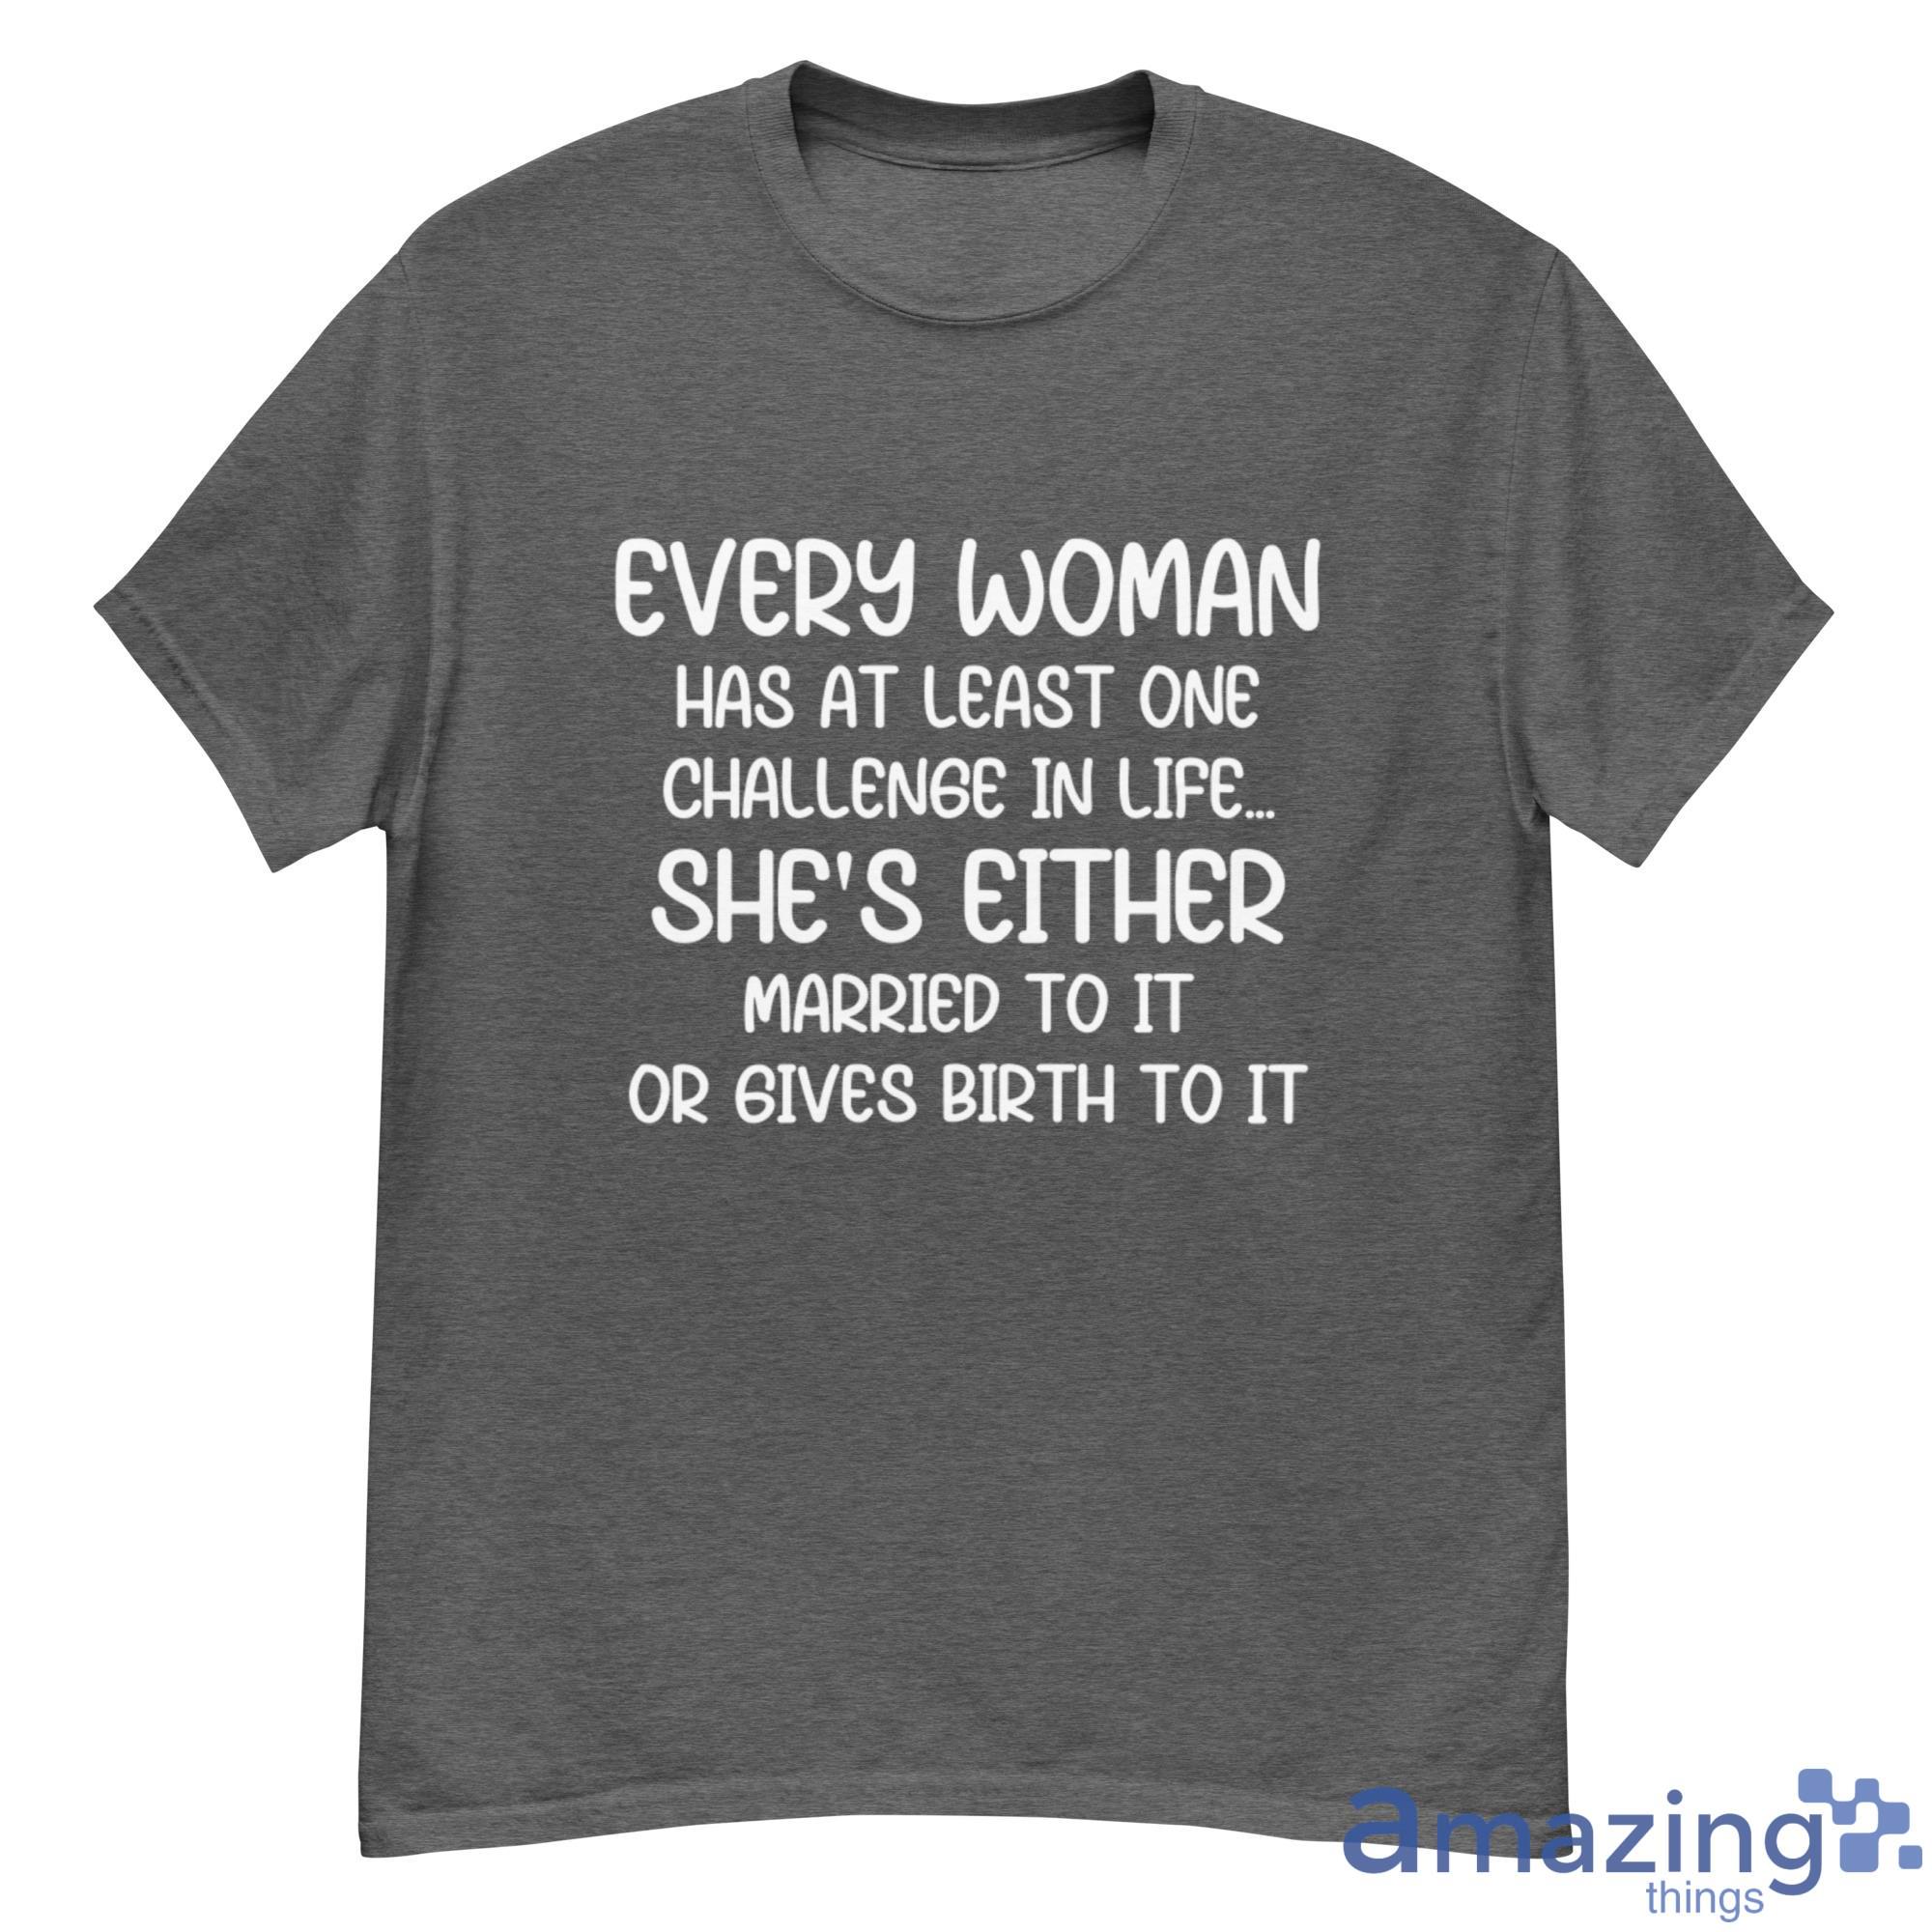 Every Woman Has At Least One Challenge In Life, Shes Either Married To It Or Gives Birth To It Shirt - 500G Men’s Classic Tee Gildan-1